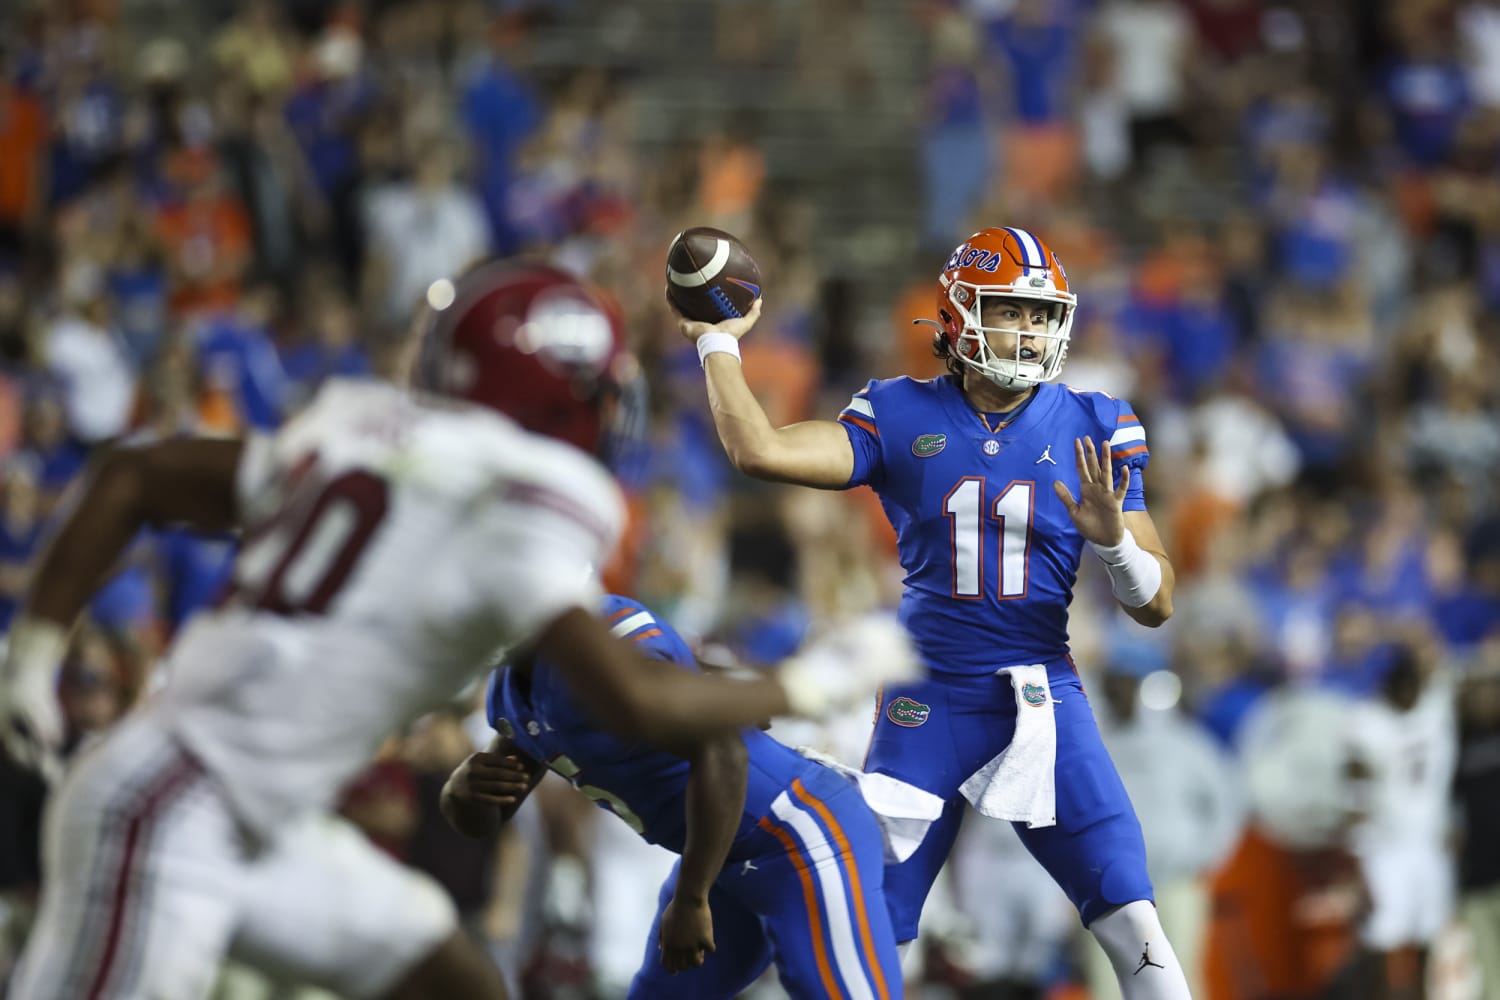 University of Florida officially dismisses quarterback from team over child sex abuse images charges